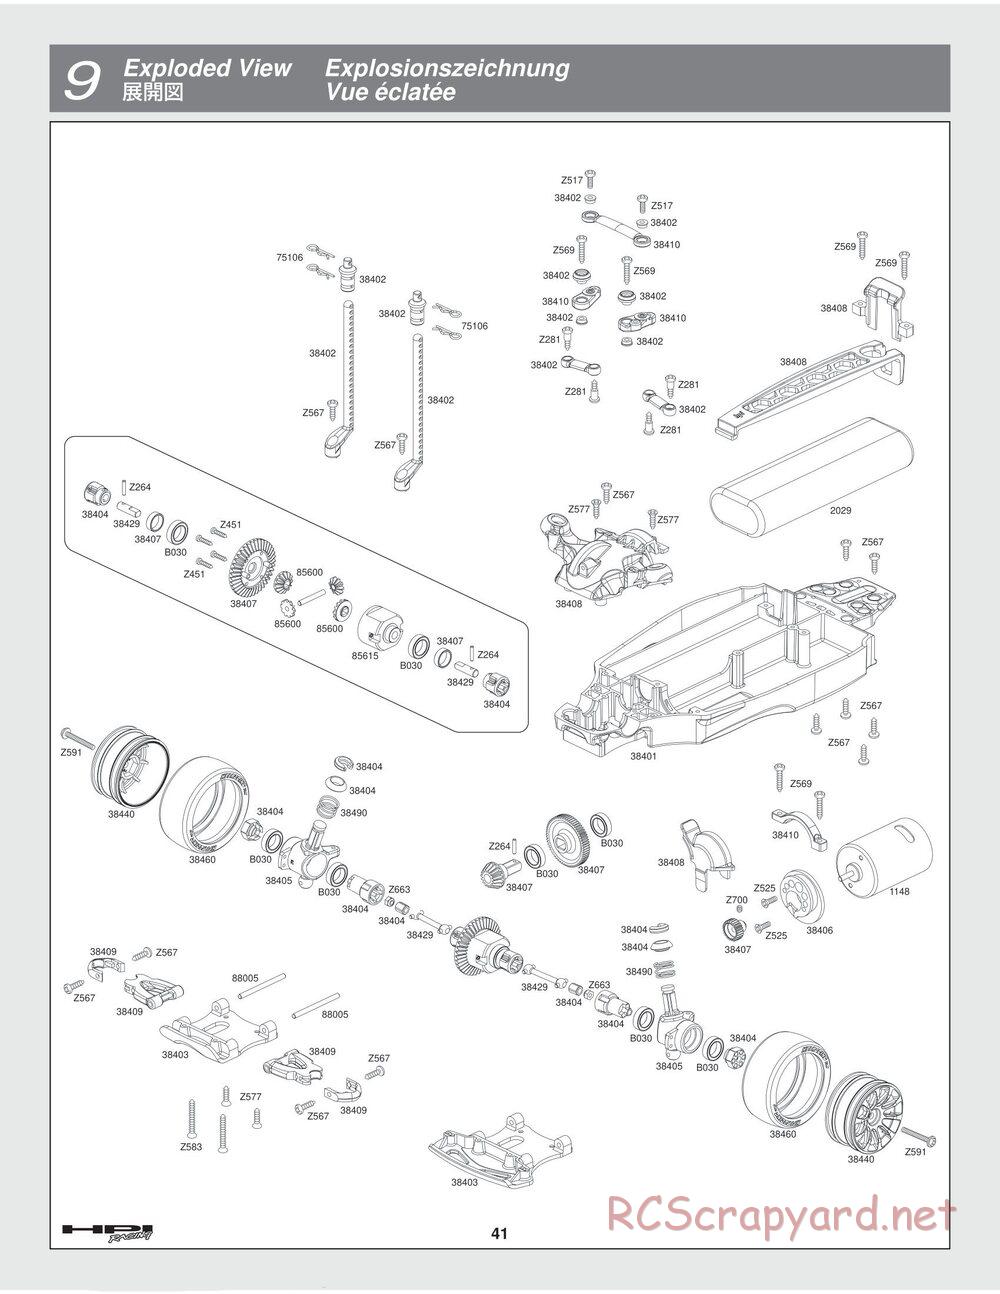 HPI - Switch - Exploded View - Page 41